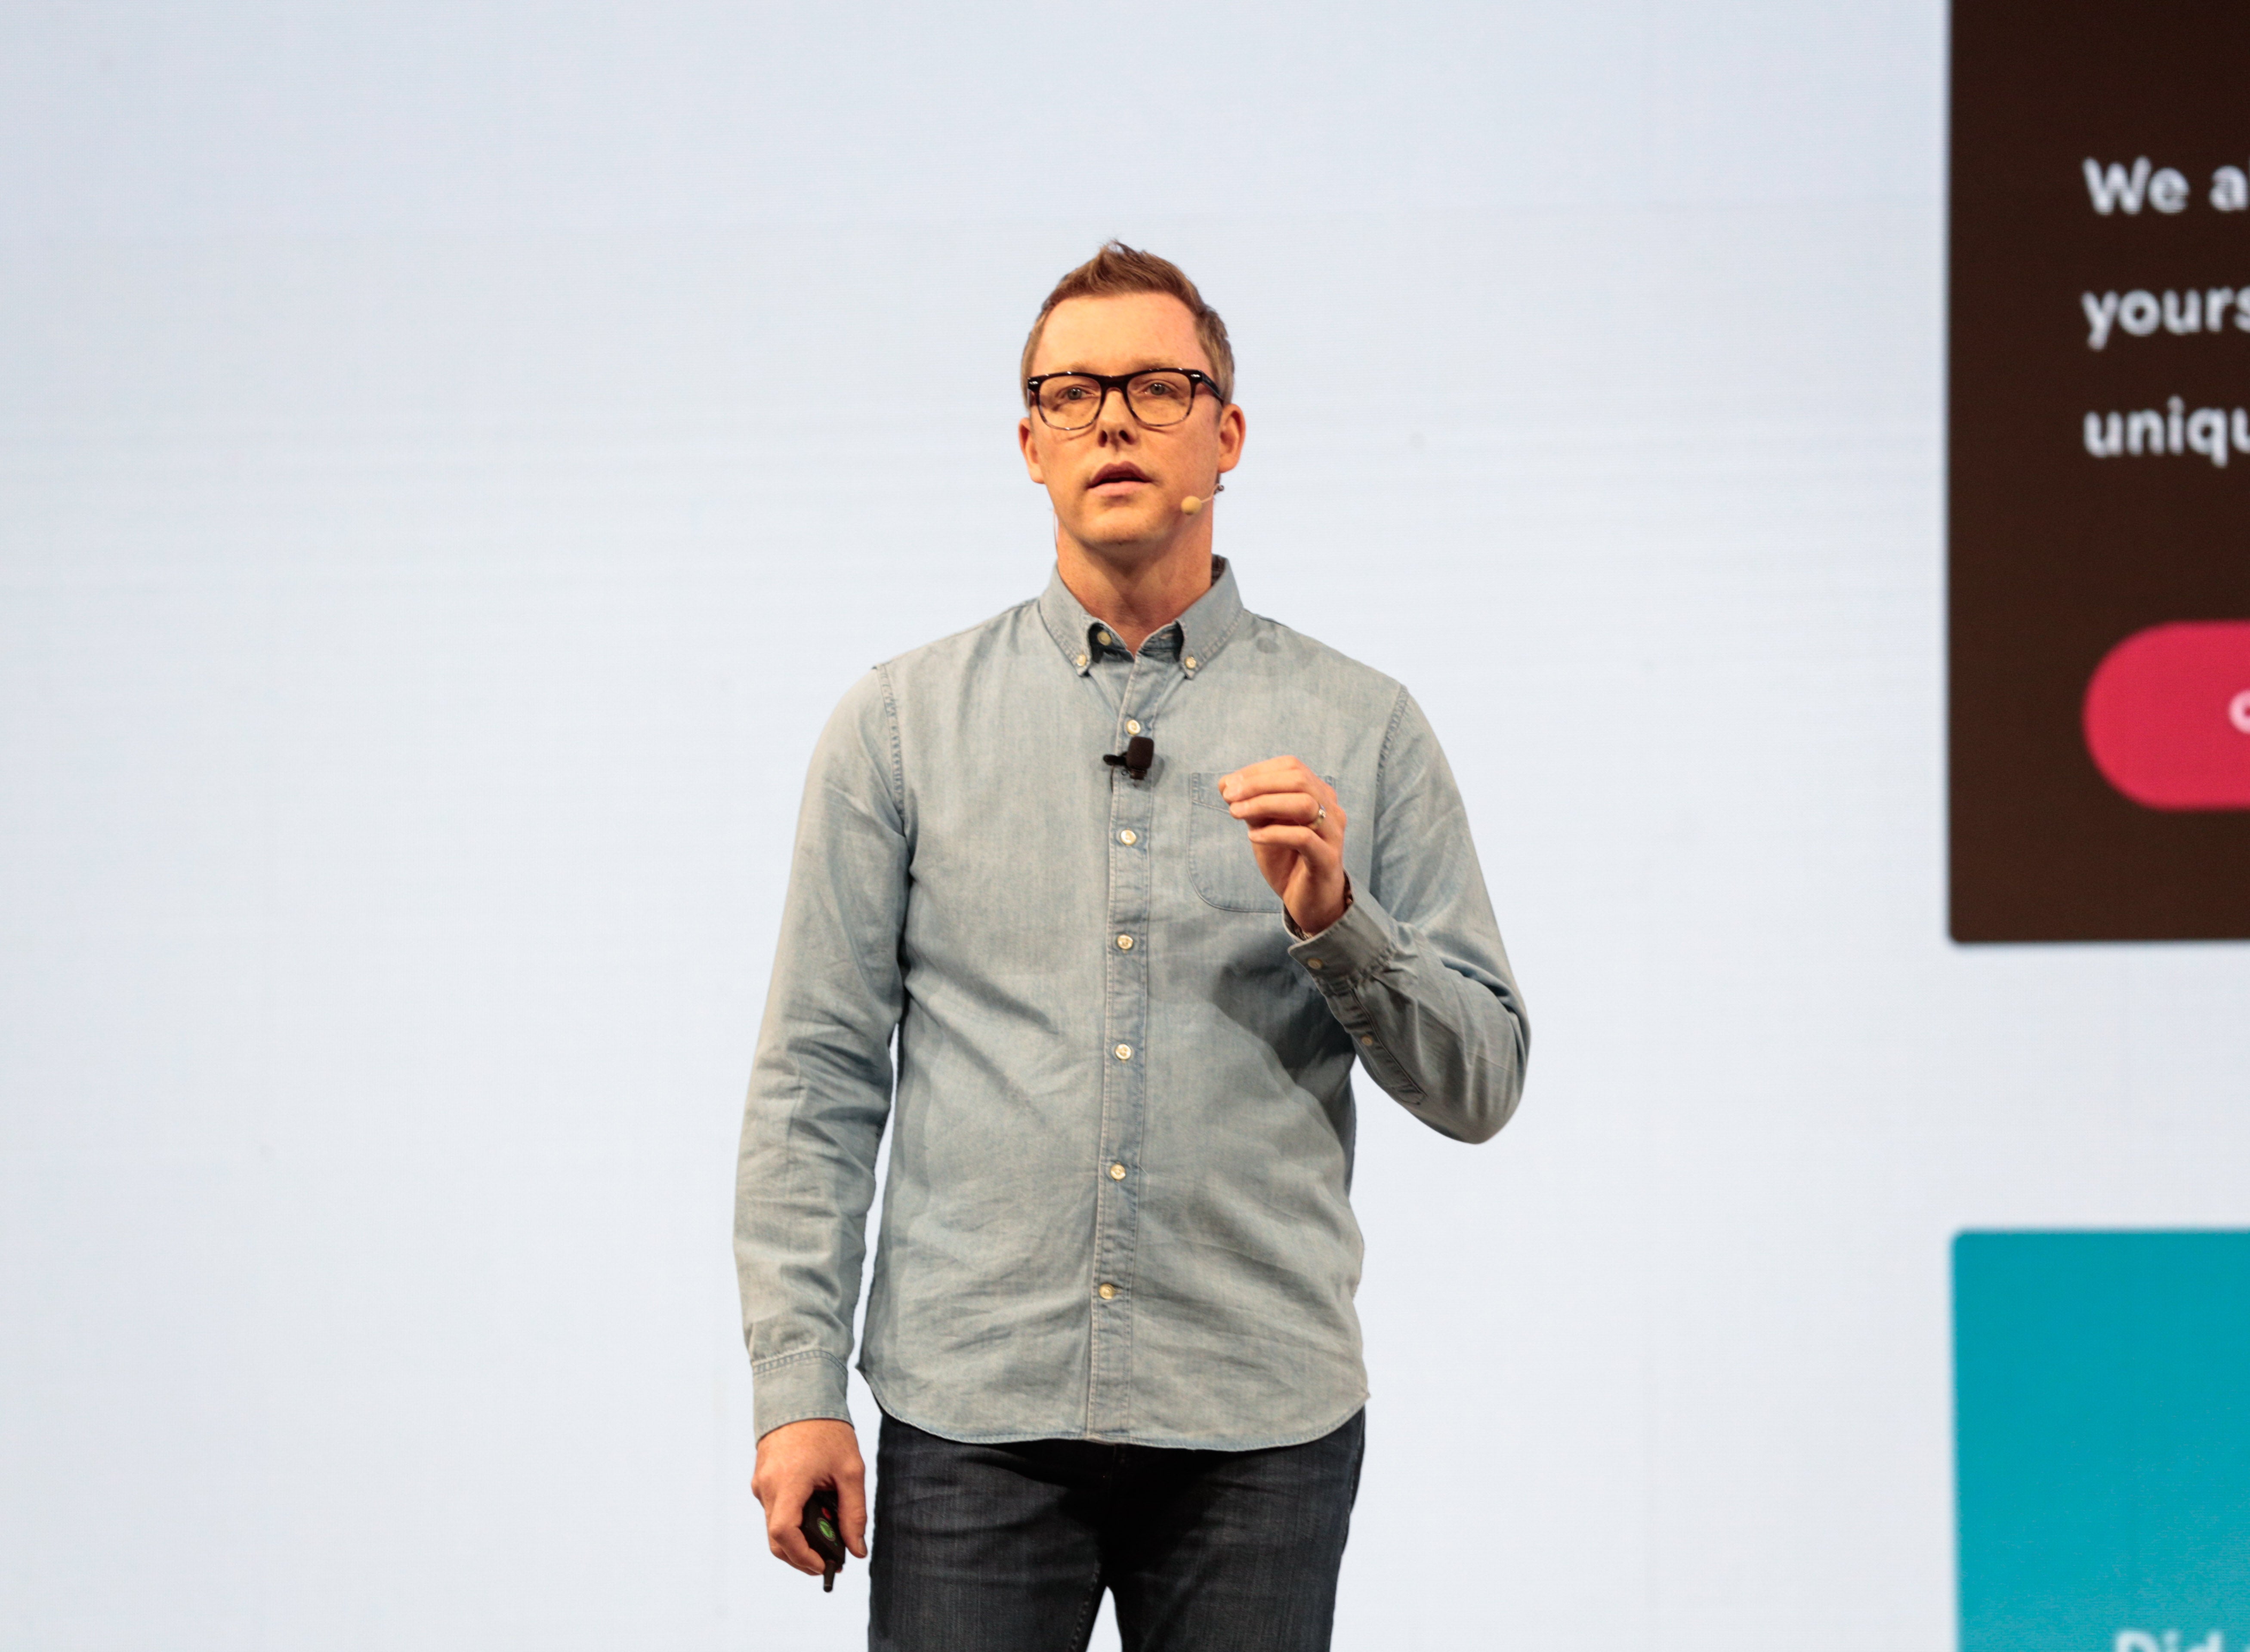 David Moellenkamp, Director of Product of Shopify Plus, announces that with Shopify Payments, all merchants can now sell in multiple currencies and get paid in their local currency at the company’s annual partner conference, Shopify Unite, in Toronto, Canada on June 19, 2019.